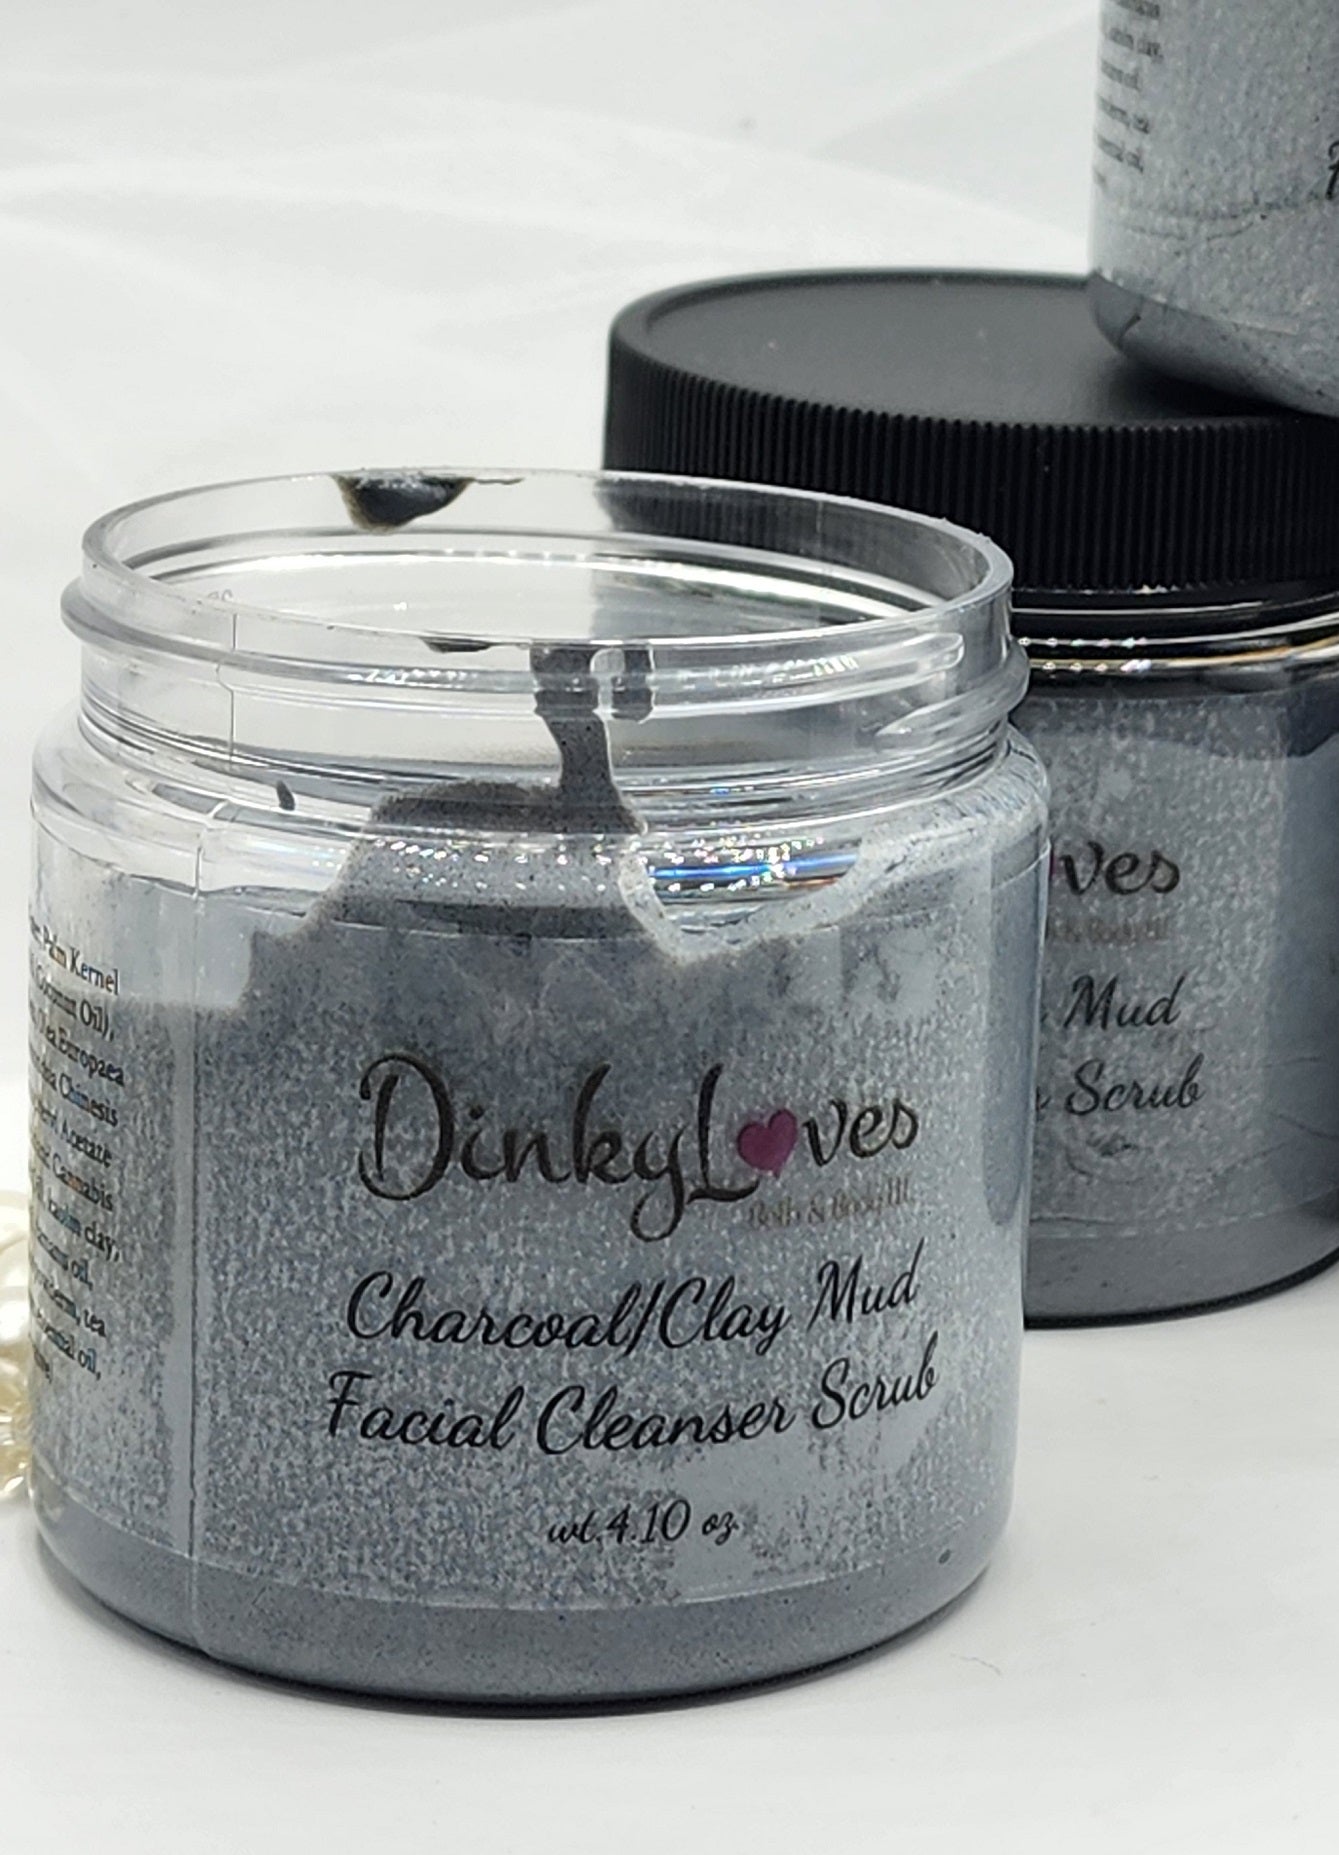 CHARCOAL / CLAY MUD FACIAL Cleanser Scrub / Activated Charcoal / Gift Idea / Essential Oil / Vegan Friendly